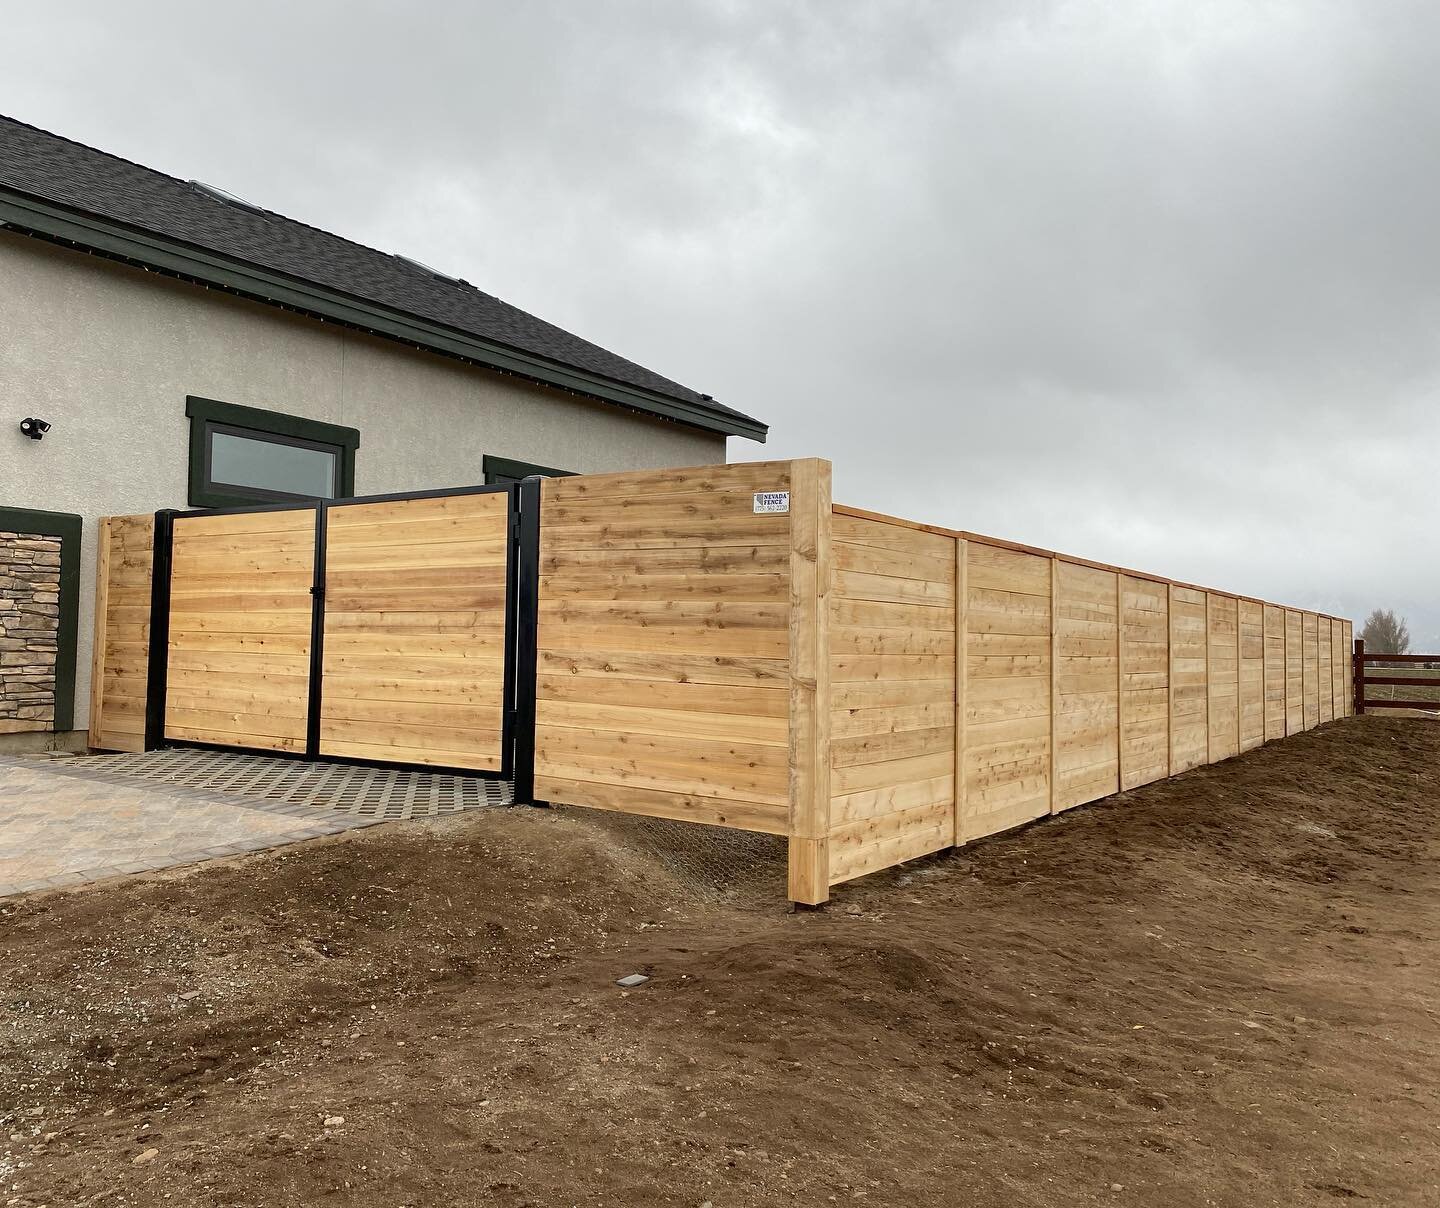 Despite the lumber price increases, we still offer economical fence styles like this beautiful cedar! Call us to schedule a quote!
📲 🤍🦾

 #NevadaFence #horizonalfencing #steelframedgates #gates #fences #cedar #licensedcontractor #BuiltToLast